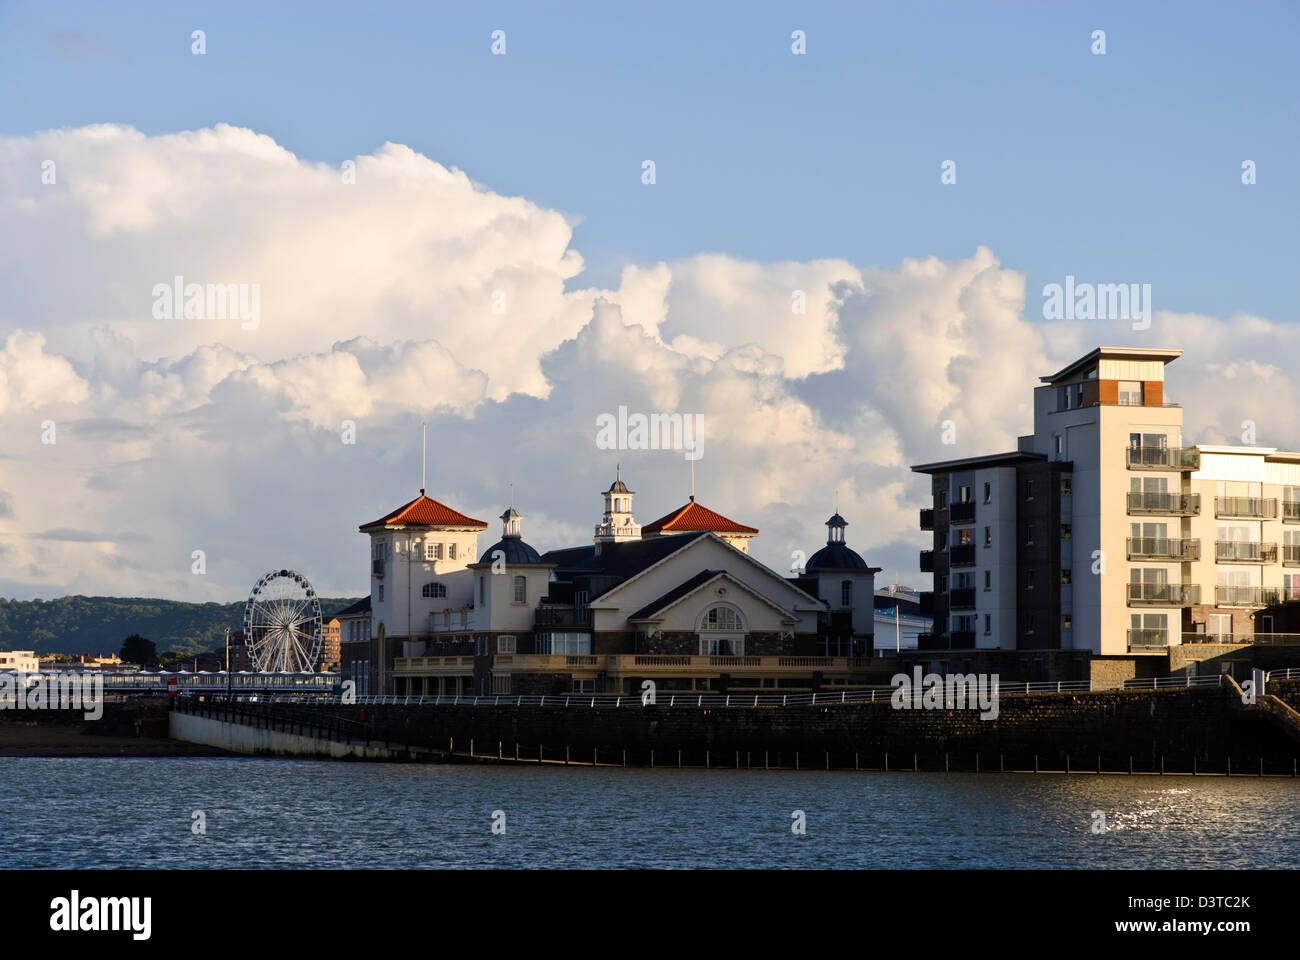 Knightstone island in Weston Super Mare, with large storm clouds in the background and raking sunlight hitting the apartments. Stock Photo